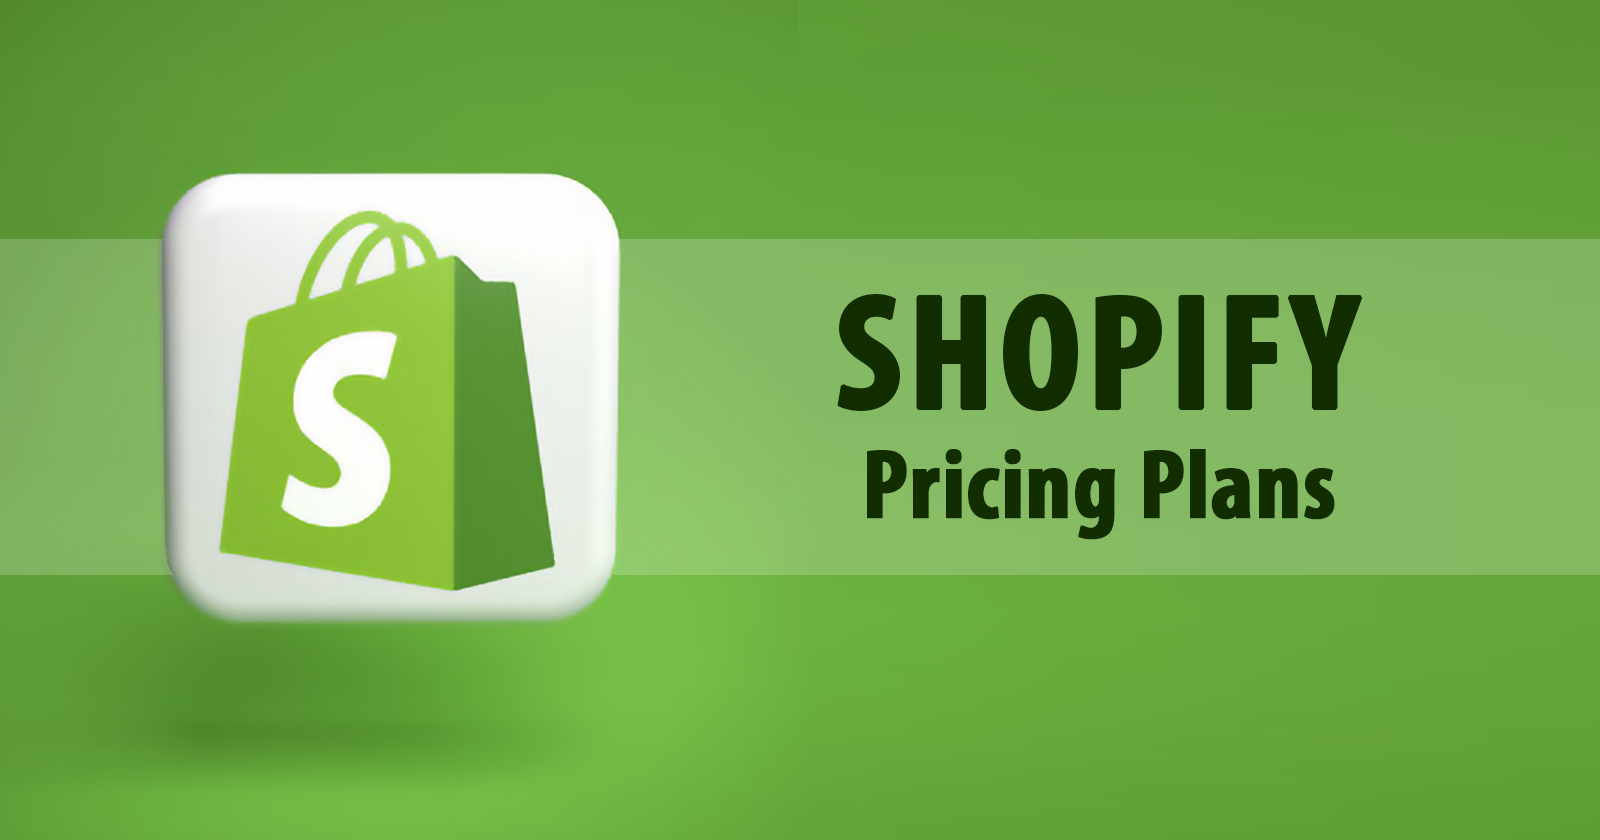 Shopify Pricing: Features, Benefits, & Plans